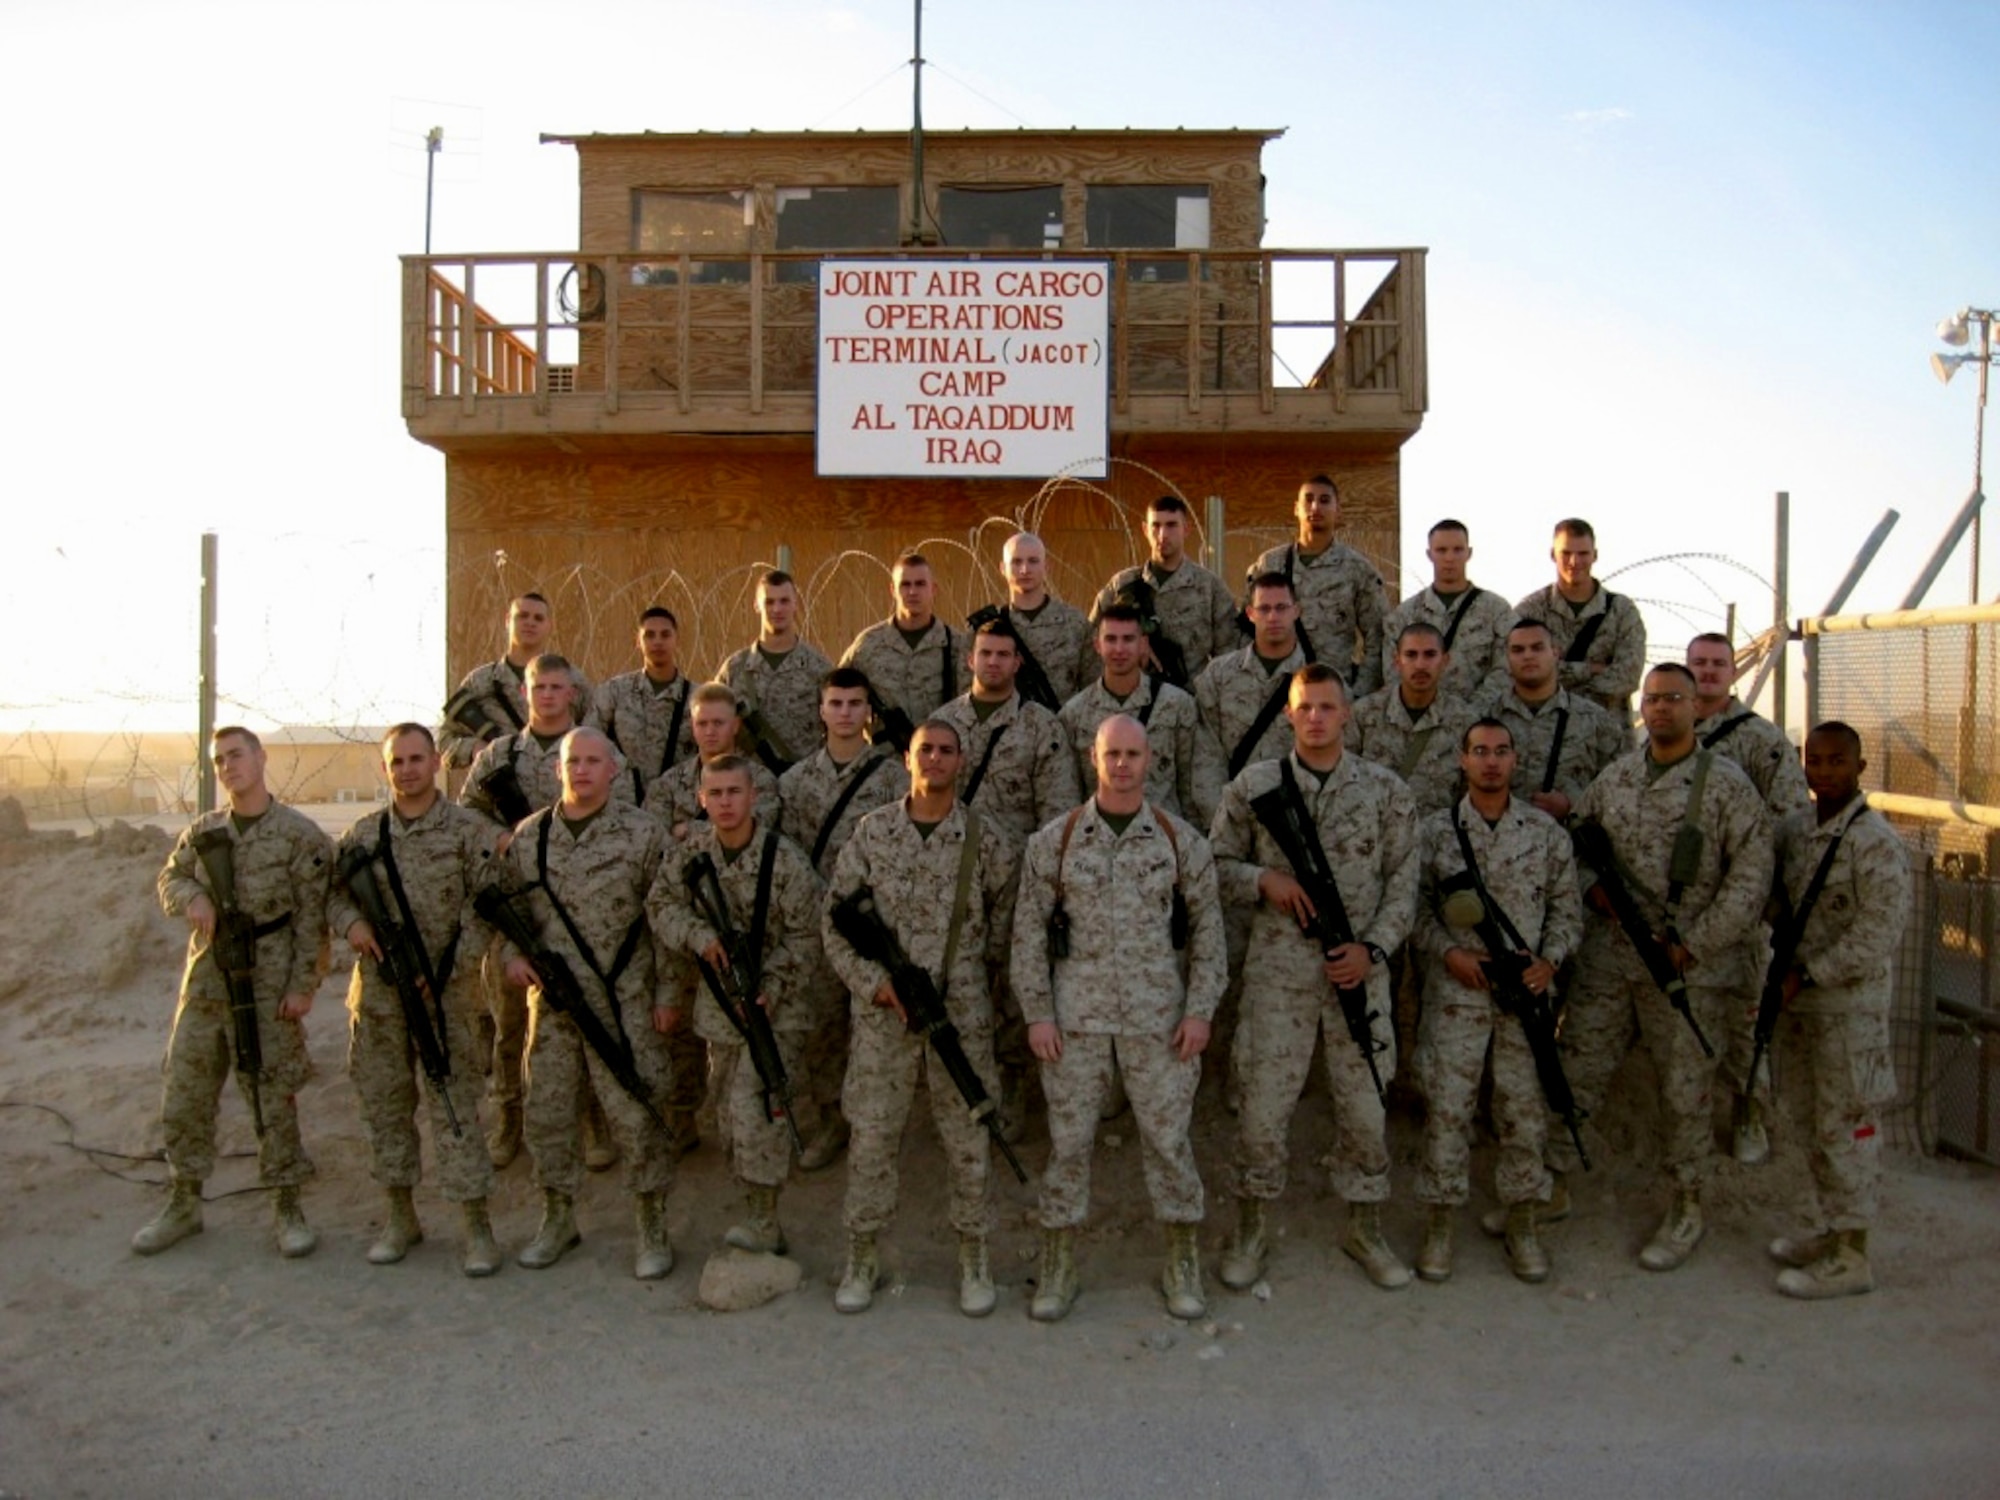 Gunnery Sgt. Jaimie Kilroy, 2nd Supply Battalion, 2nd Marine Logistics Group Landing Support Detachment chief, assembled his Marines for a photograph at the Joint Air Cargo Operations Terminal at Camp Al Taqaddum, officially known as Marine Corp Air Base Al Taqaddum, Iraq. Among the assigned Marines are nearly 50 Airmen, half of which are deployed from Dover Air Force Base. (Courtesy photo)